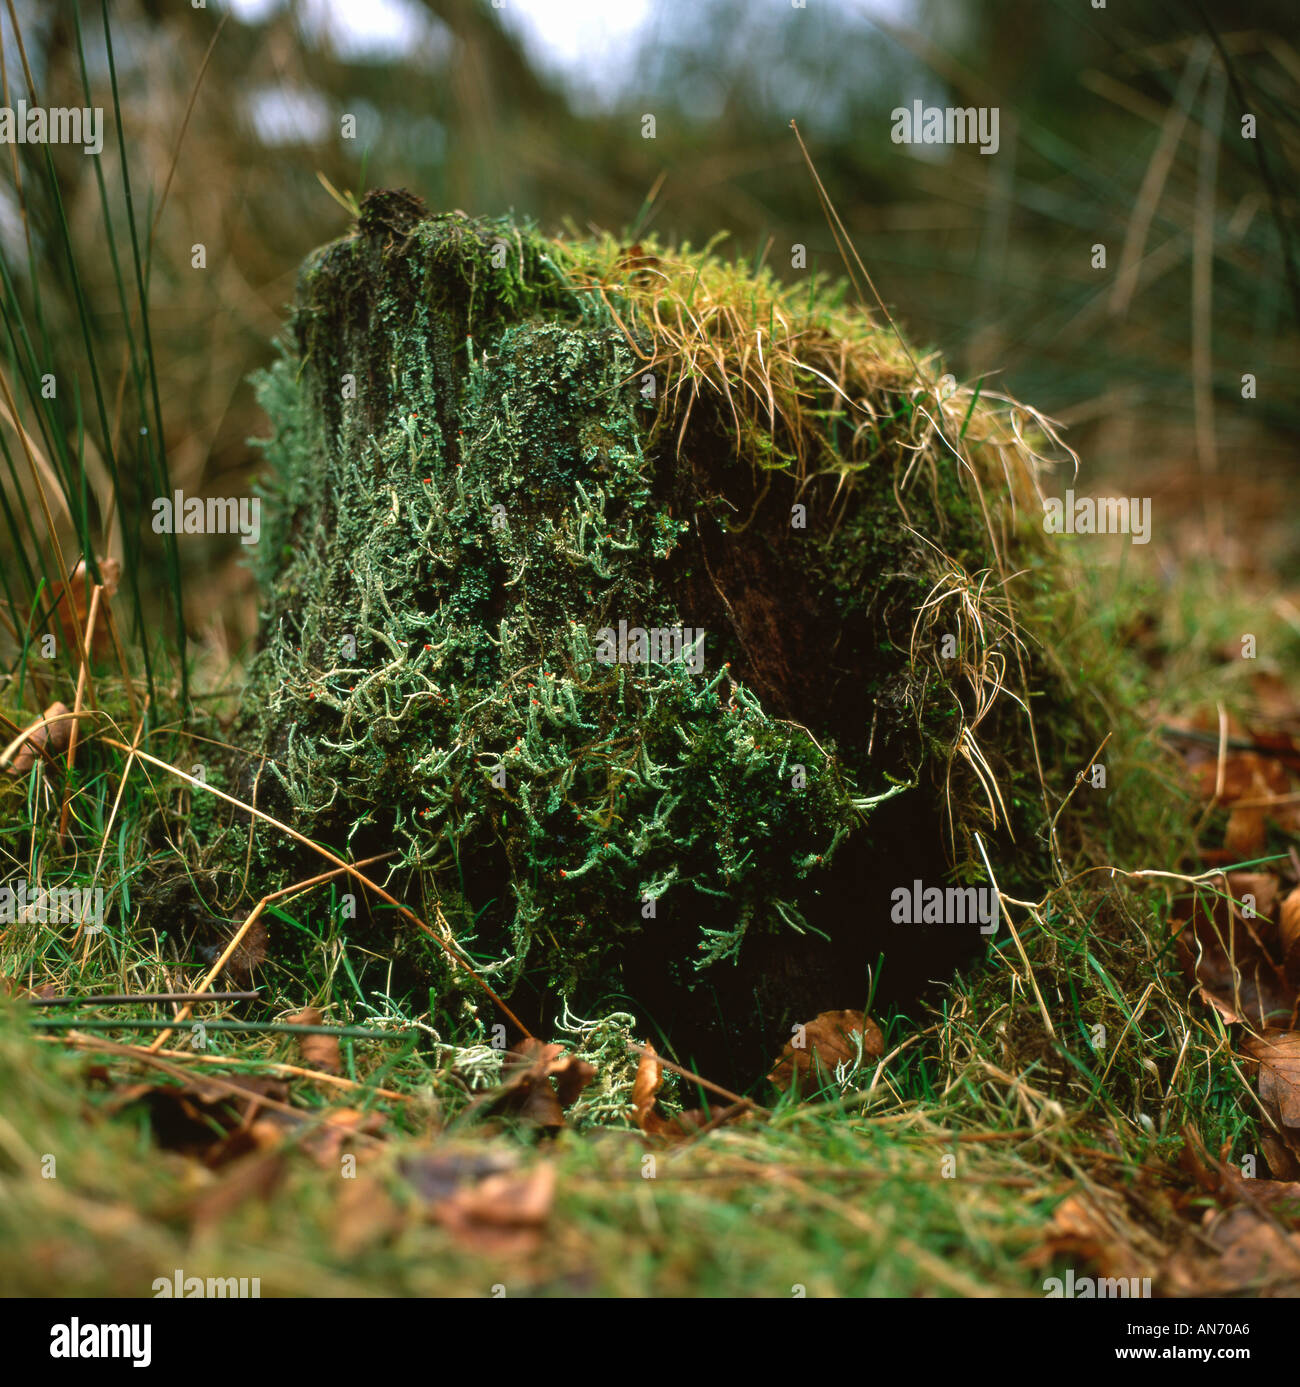 A tree stump covered in lichen, Carmarthenshire Wales UK Stock Photo